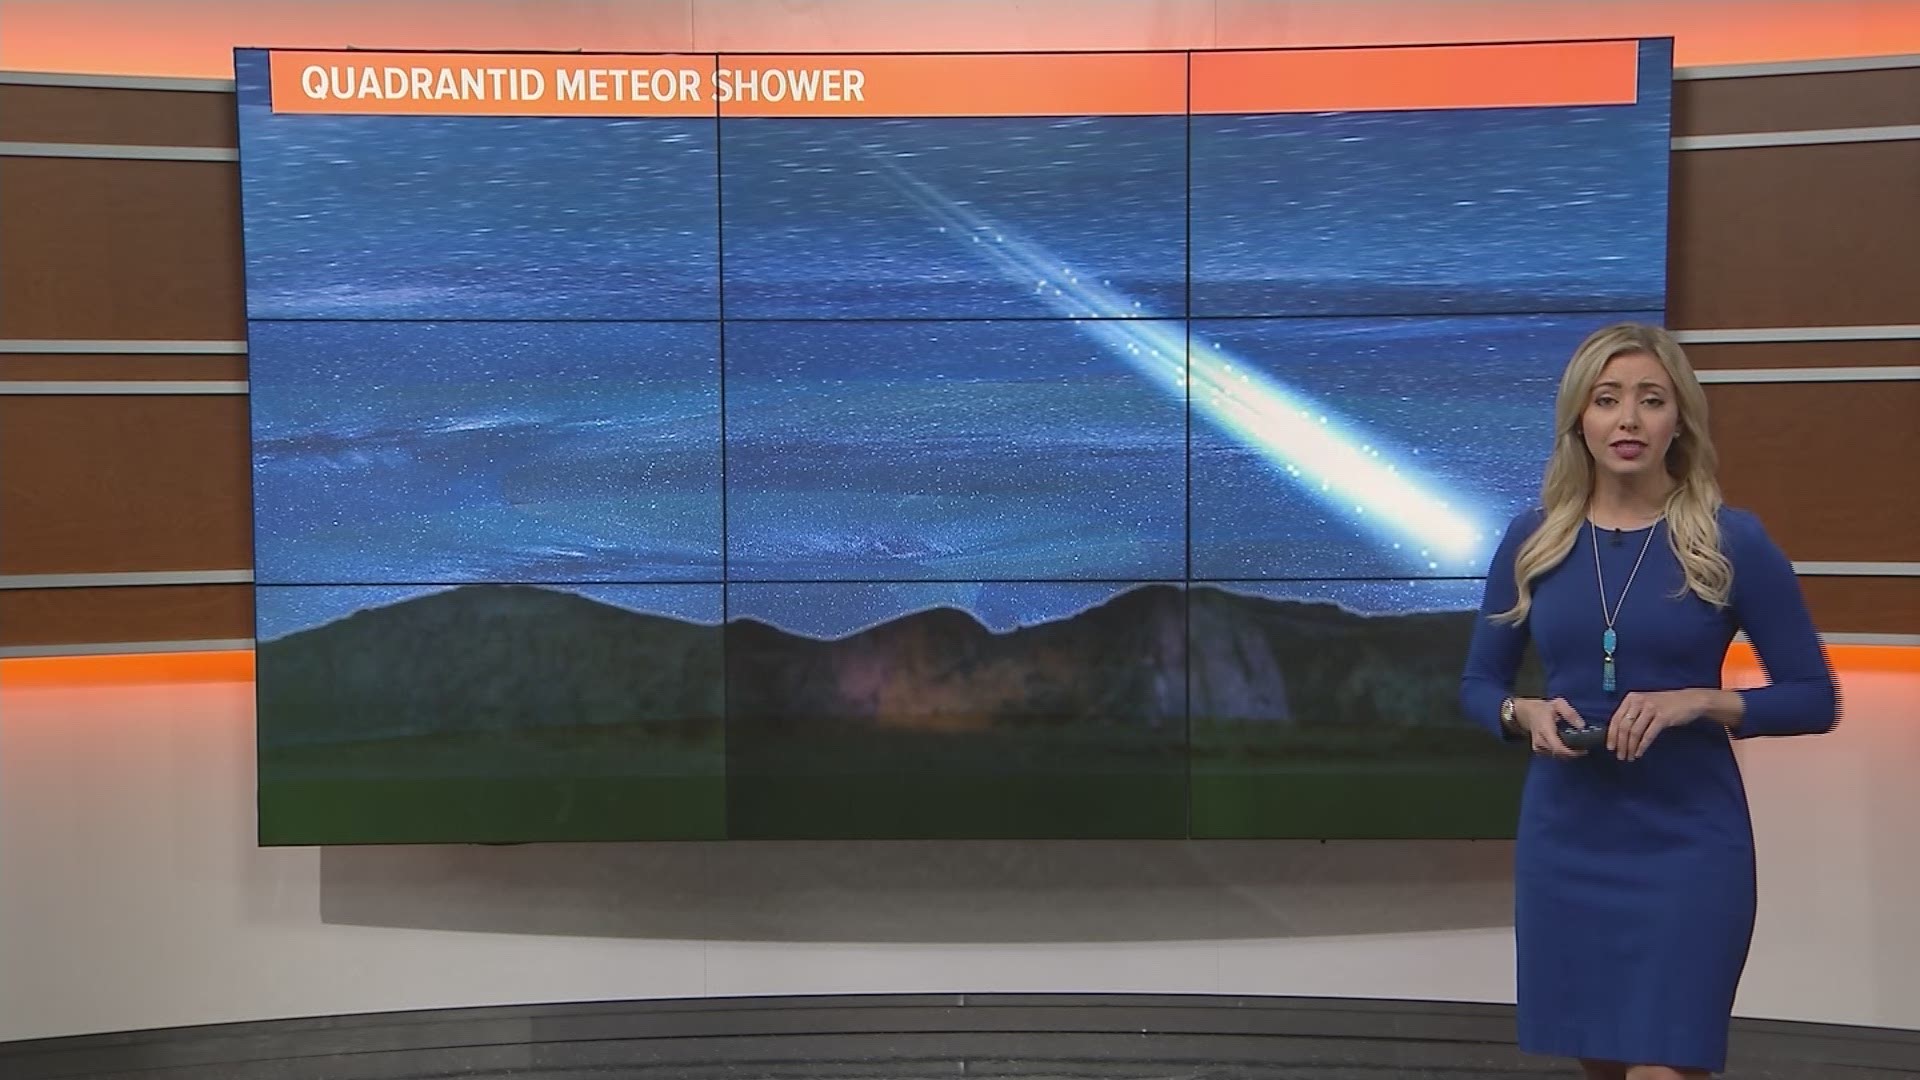 The Quadrantid Meteor Shower happened earlier this year! Did you know that these meteors come from asteroids? Get more fun facts with Kaitlynn Fish.